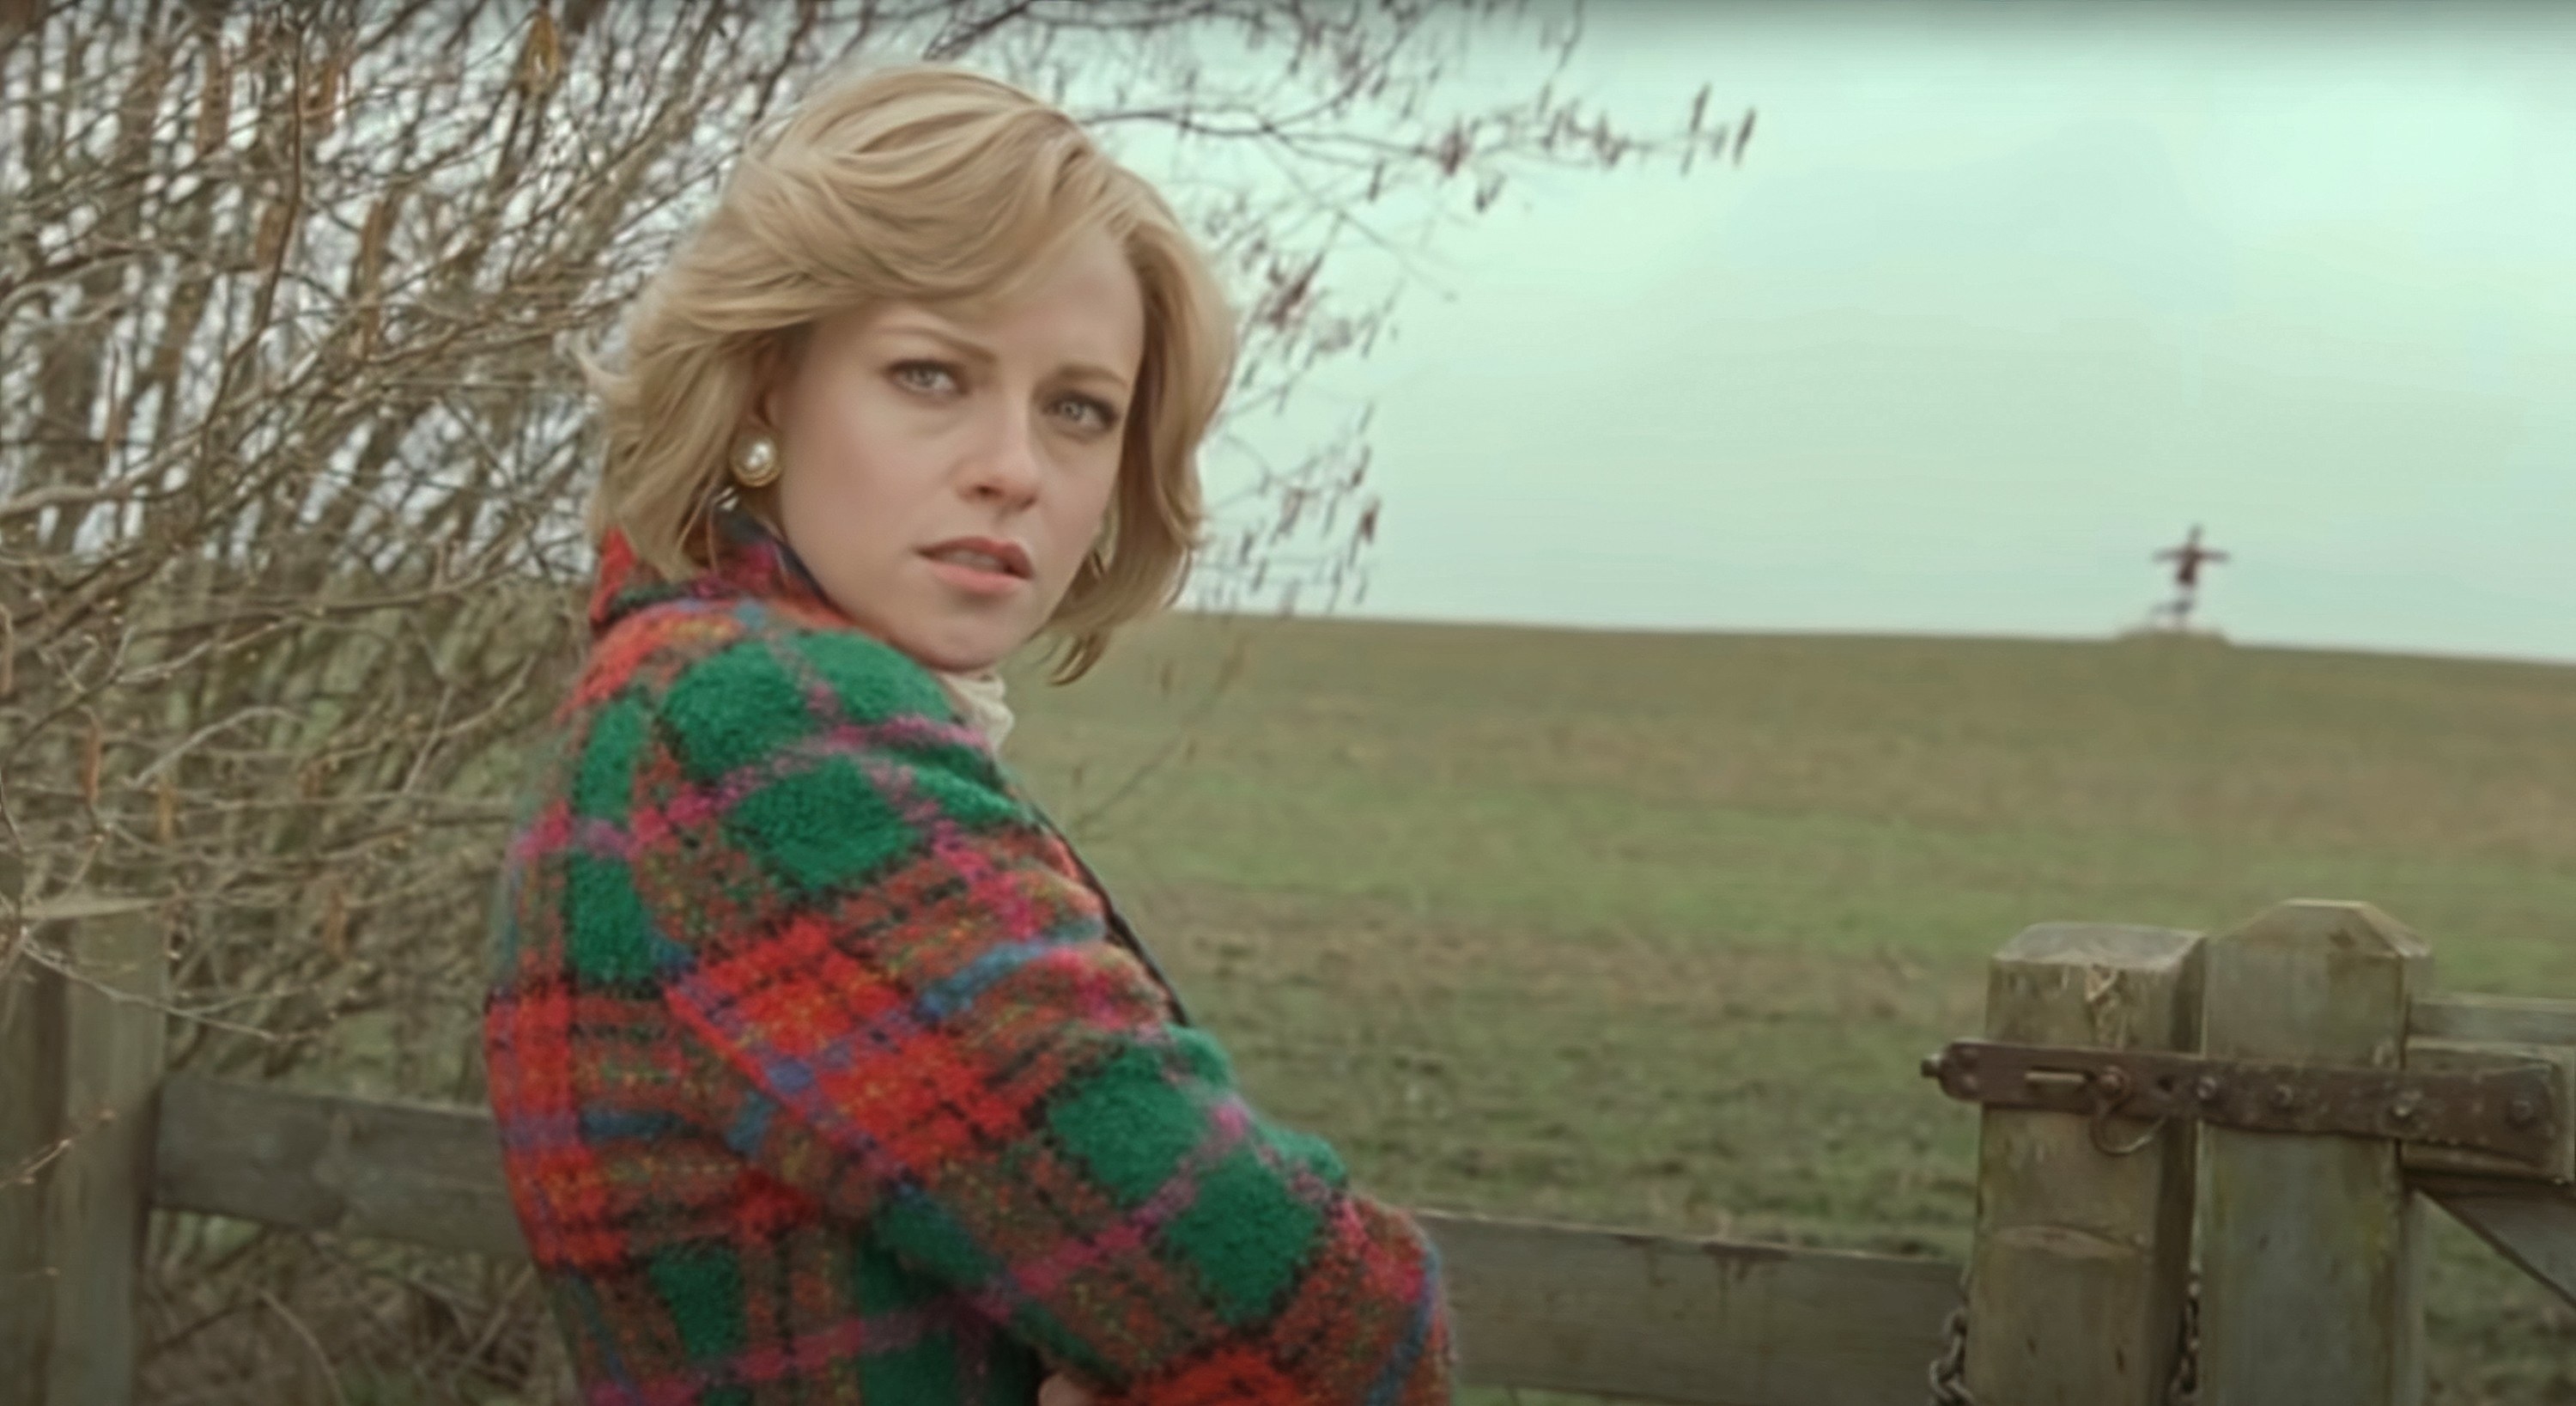 Kristen Stewart stands by a field with a scarecrow in it